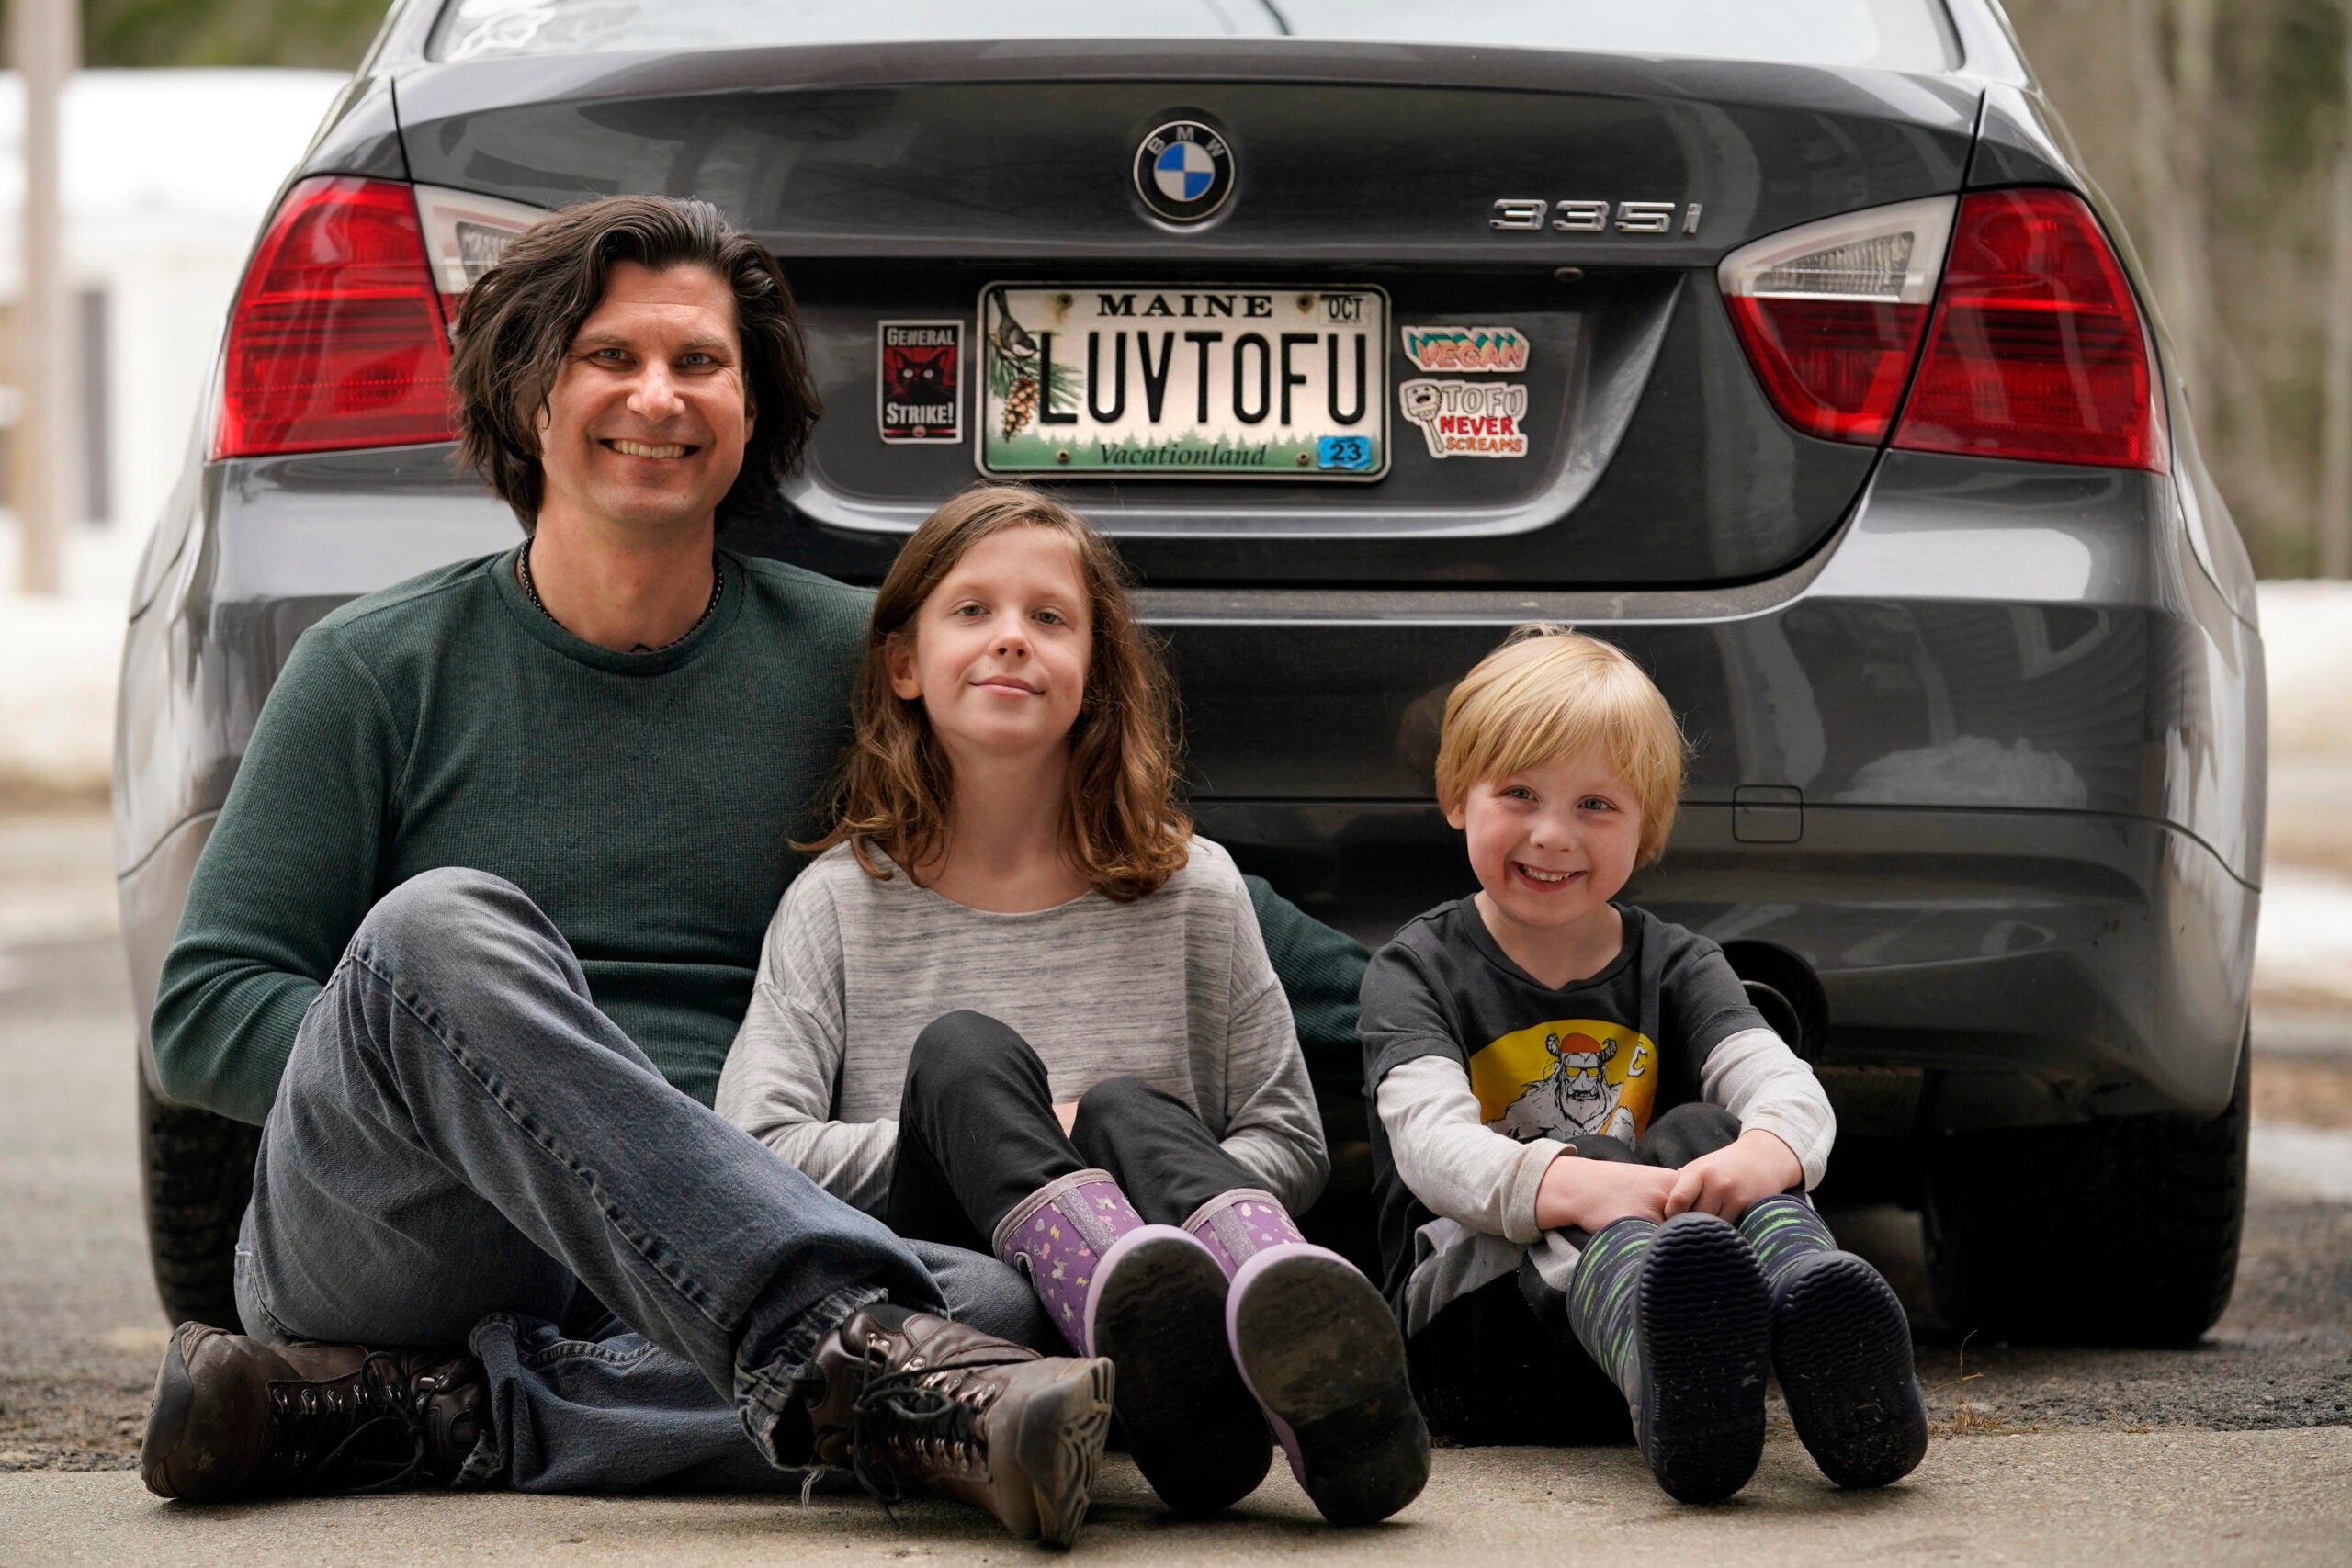 Peter Starostecki and his kids Sadie, center, and Jo Jo, pose behind their car with the vanity license plate that the state of Maine has deemed in appropriate,